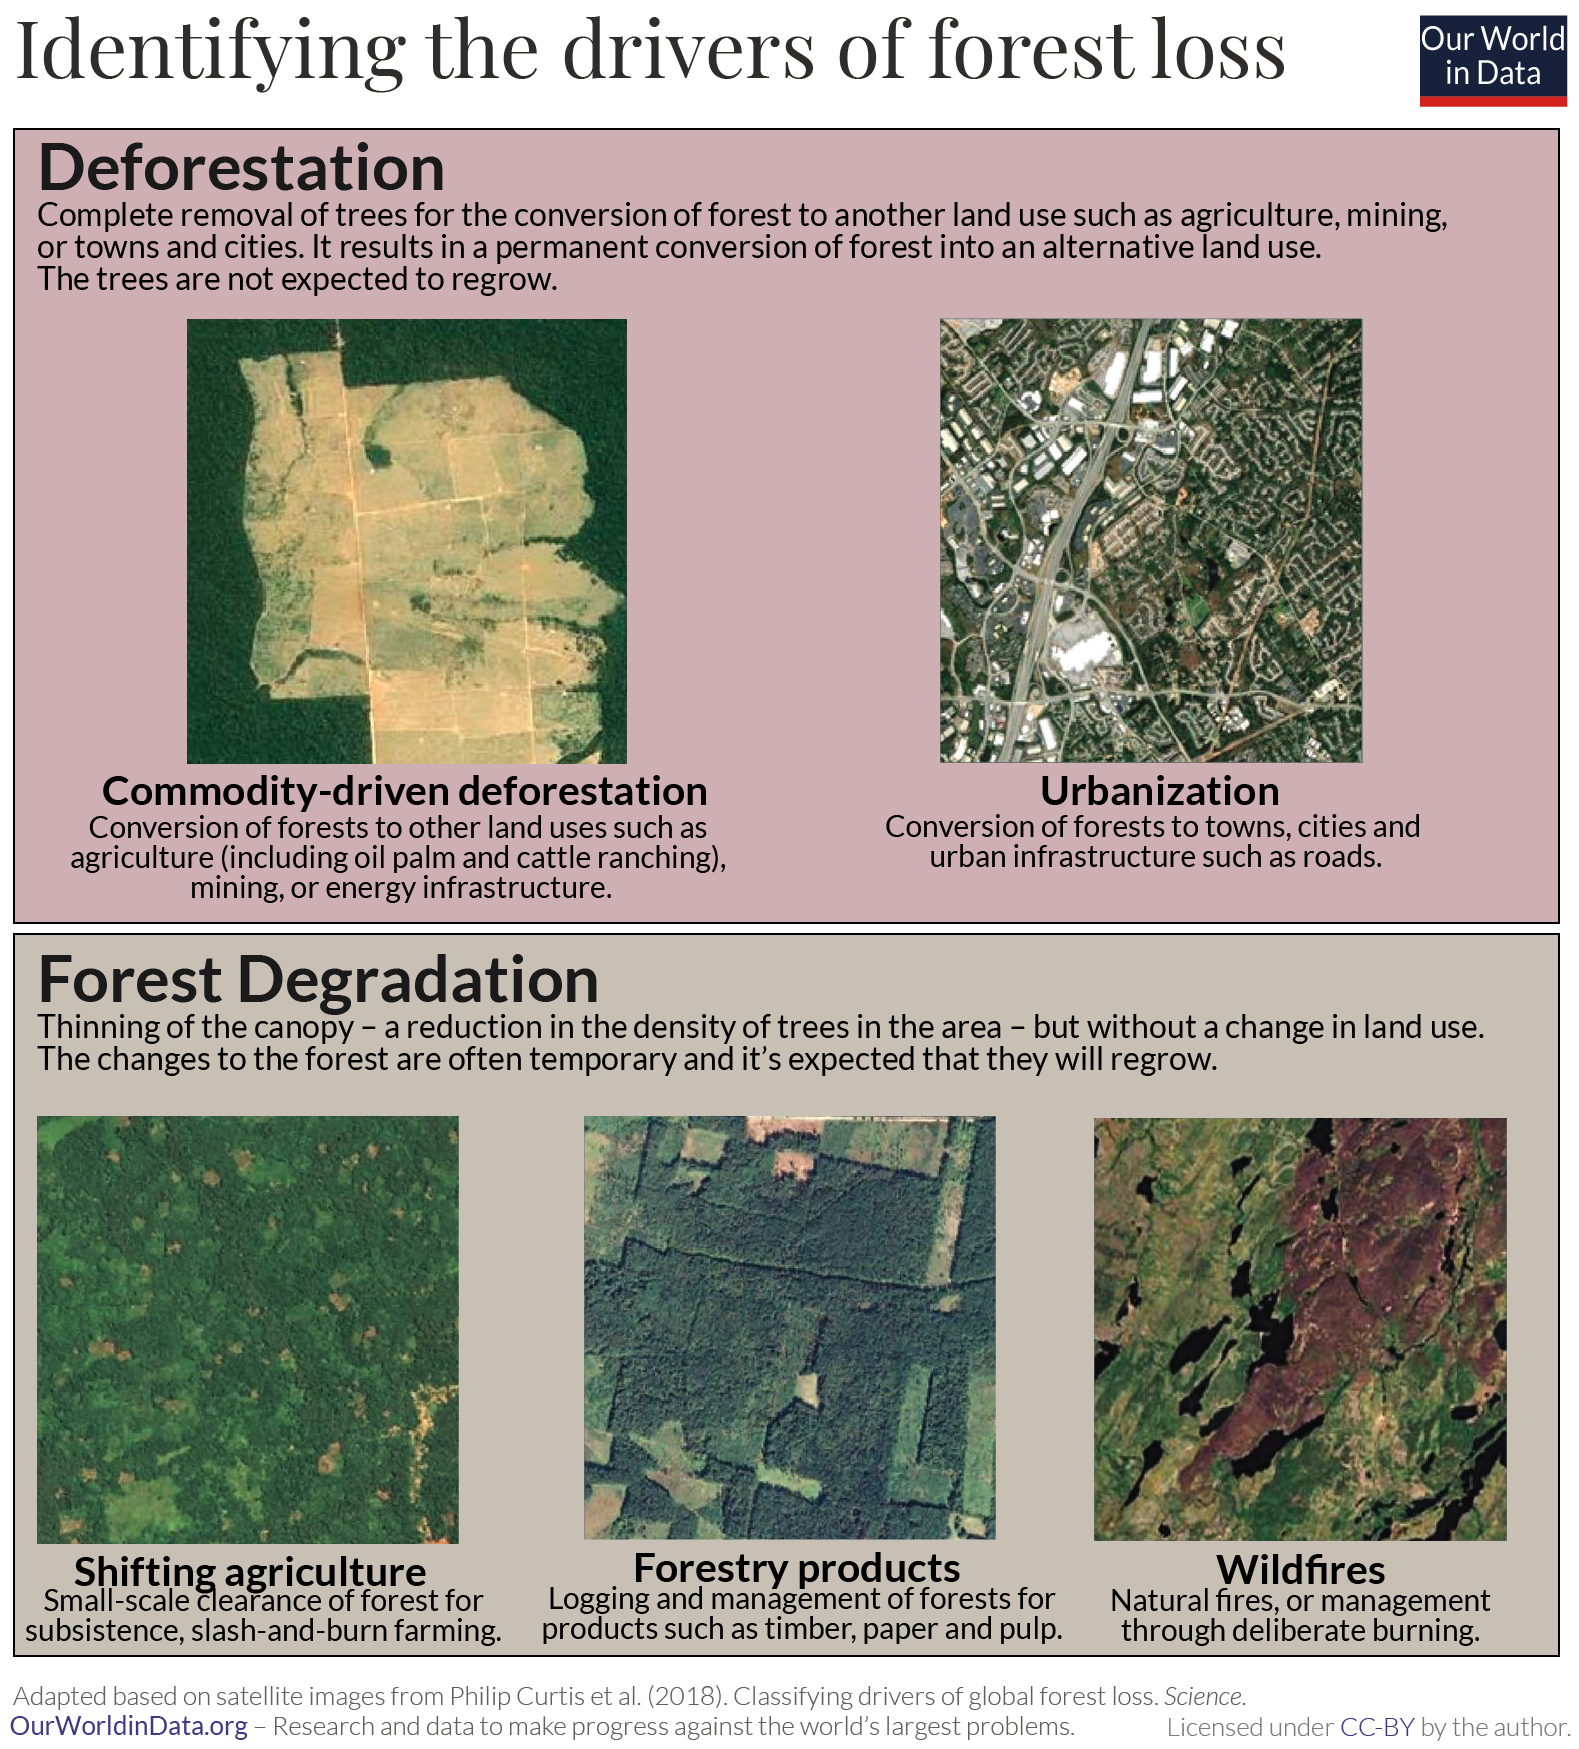 Identifying drivers of forest loss